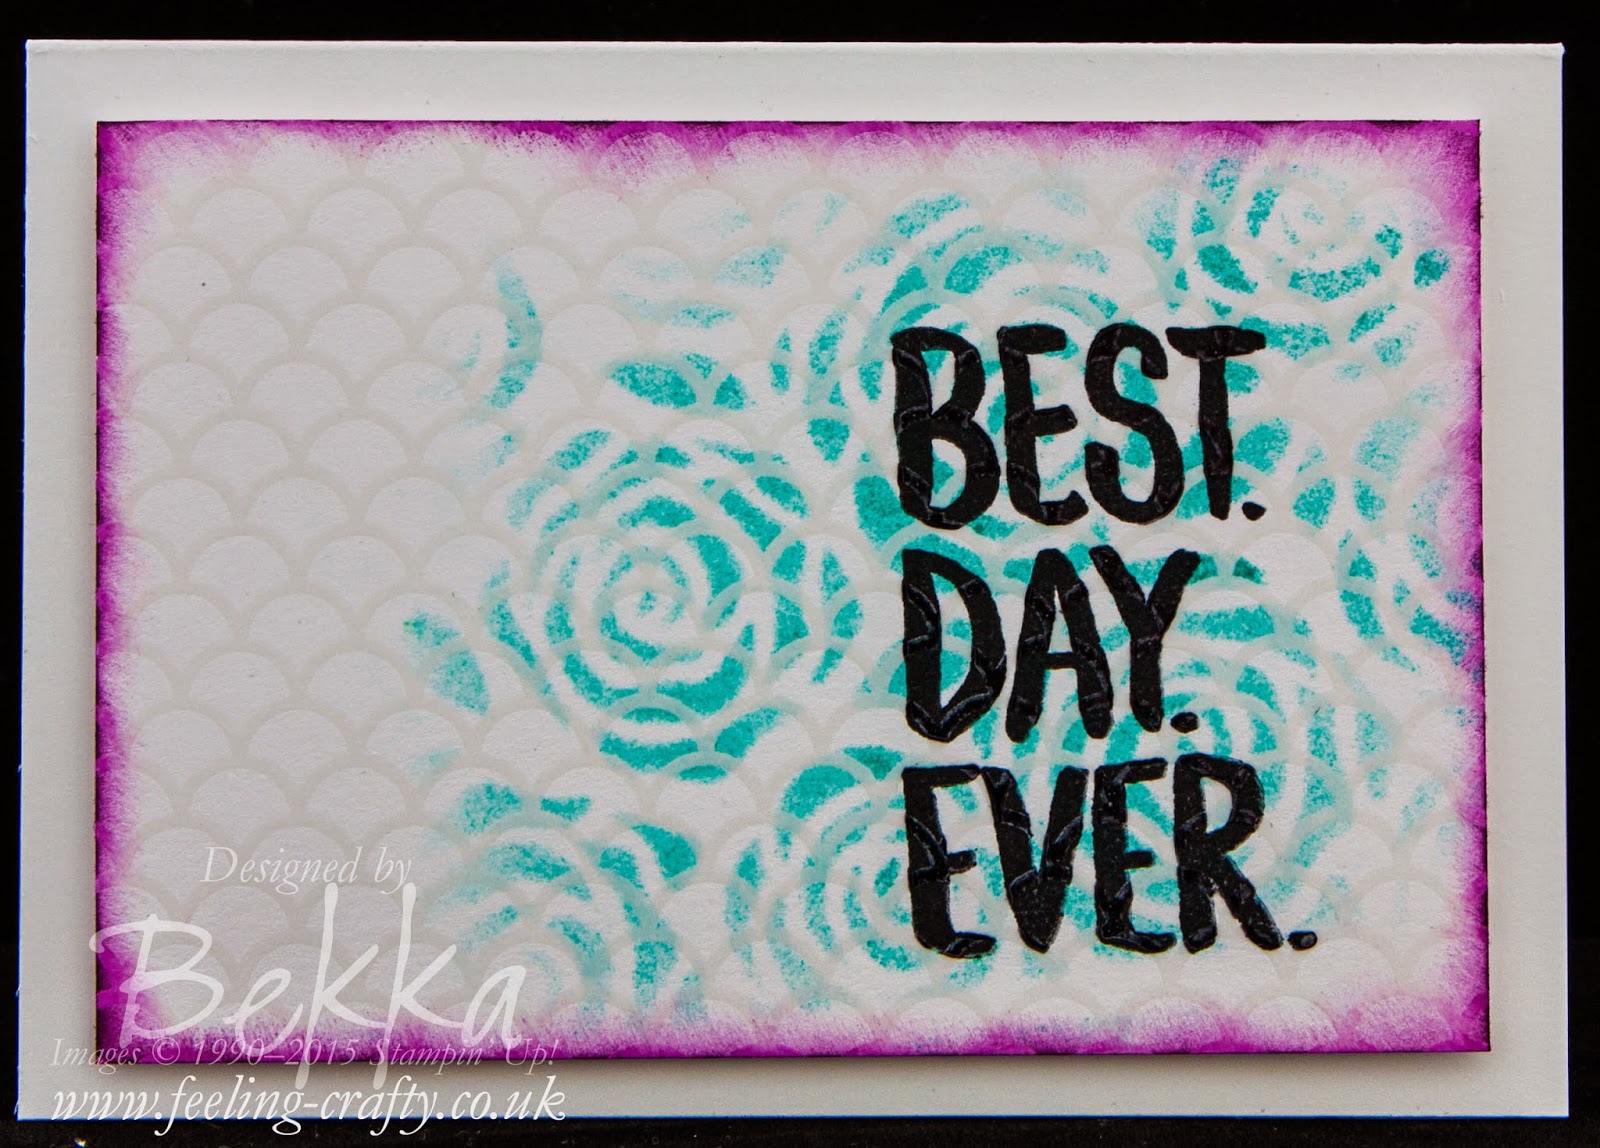 Best Day Ever Card - Check Out this great blog for lots of ideas and shopping